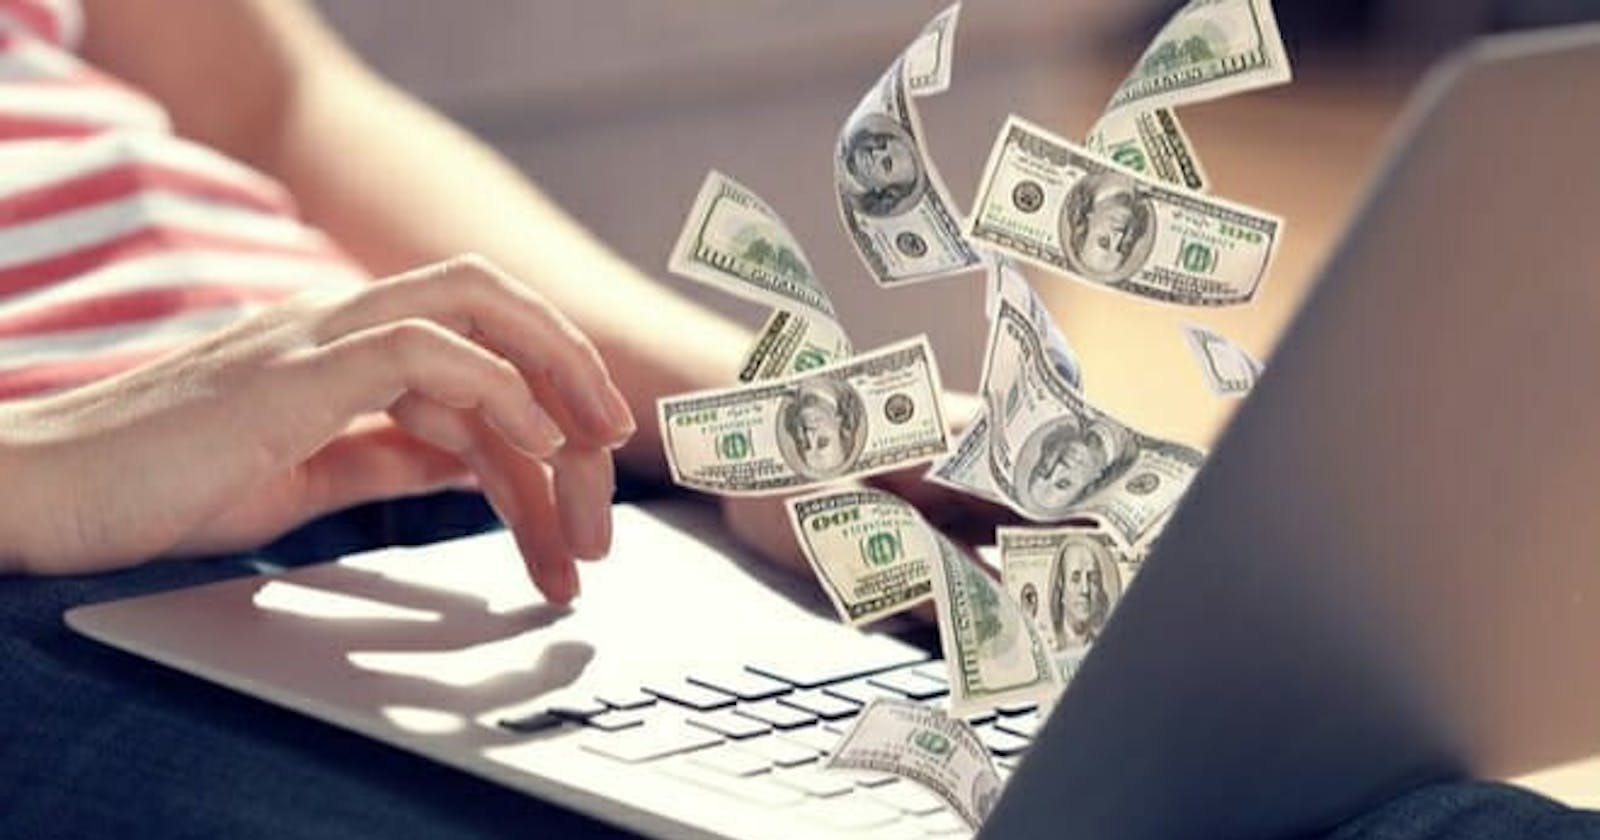 How to Make Money as an Entry-level or Junior Developer